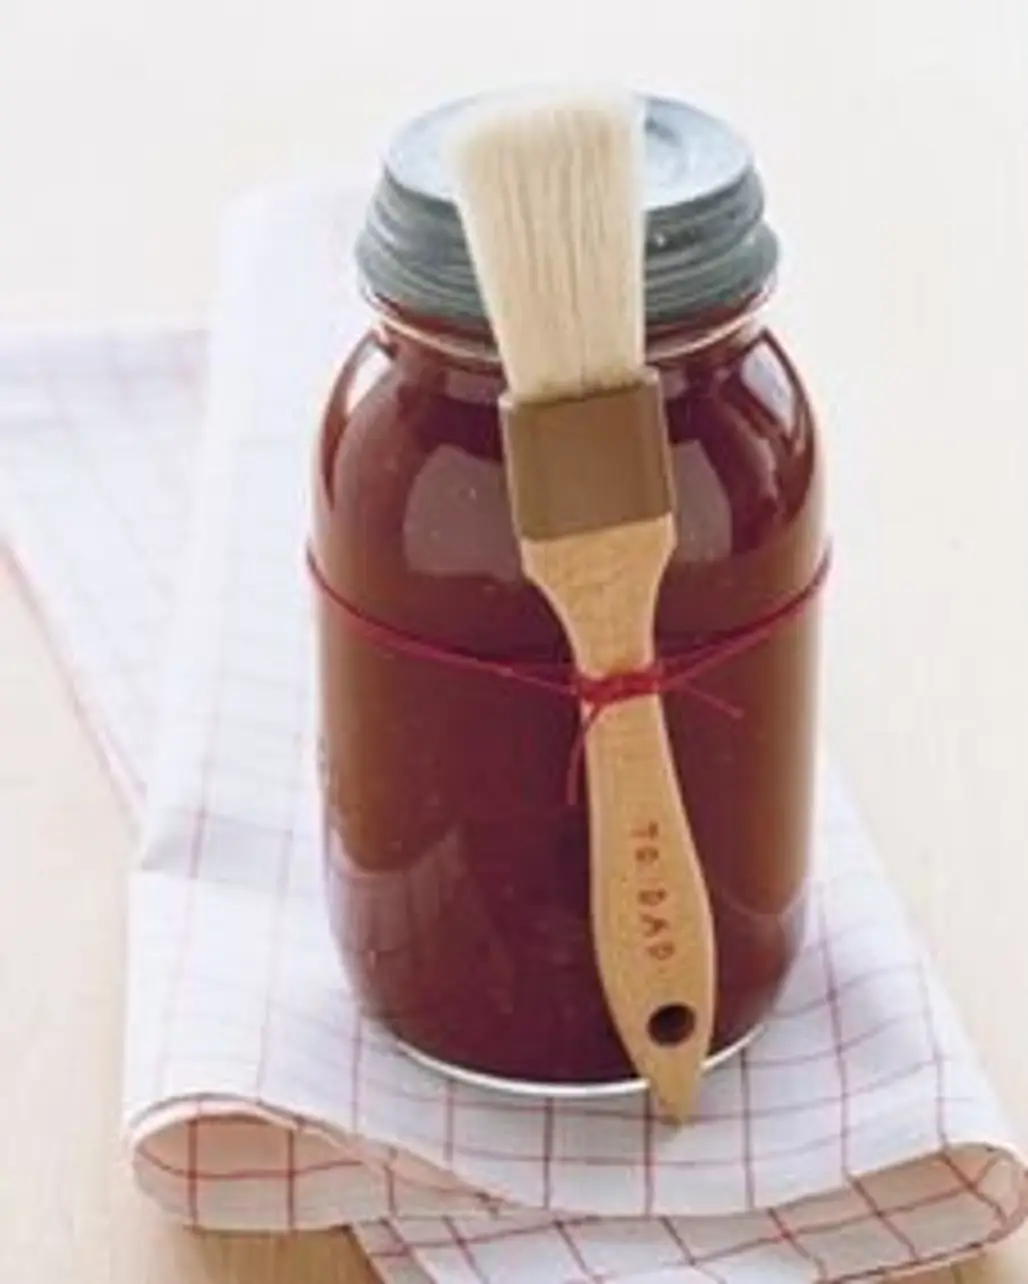 Send Home BBQ Sauce and a Brush as Party Favors